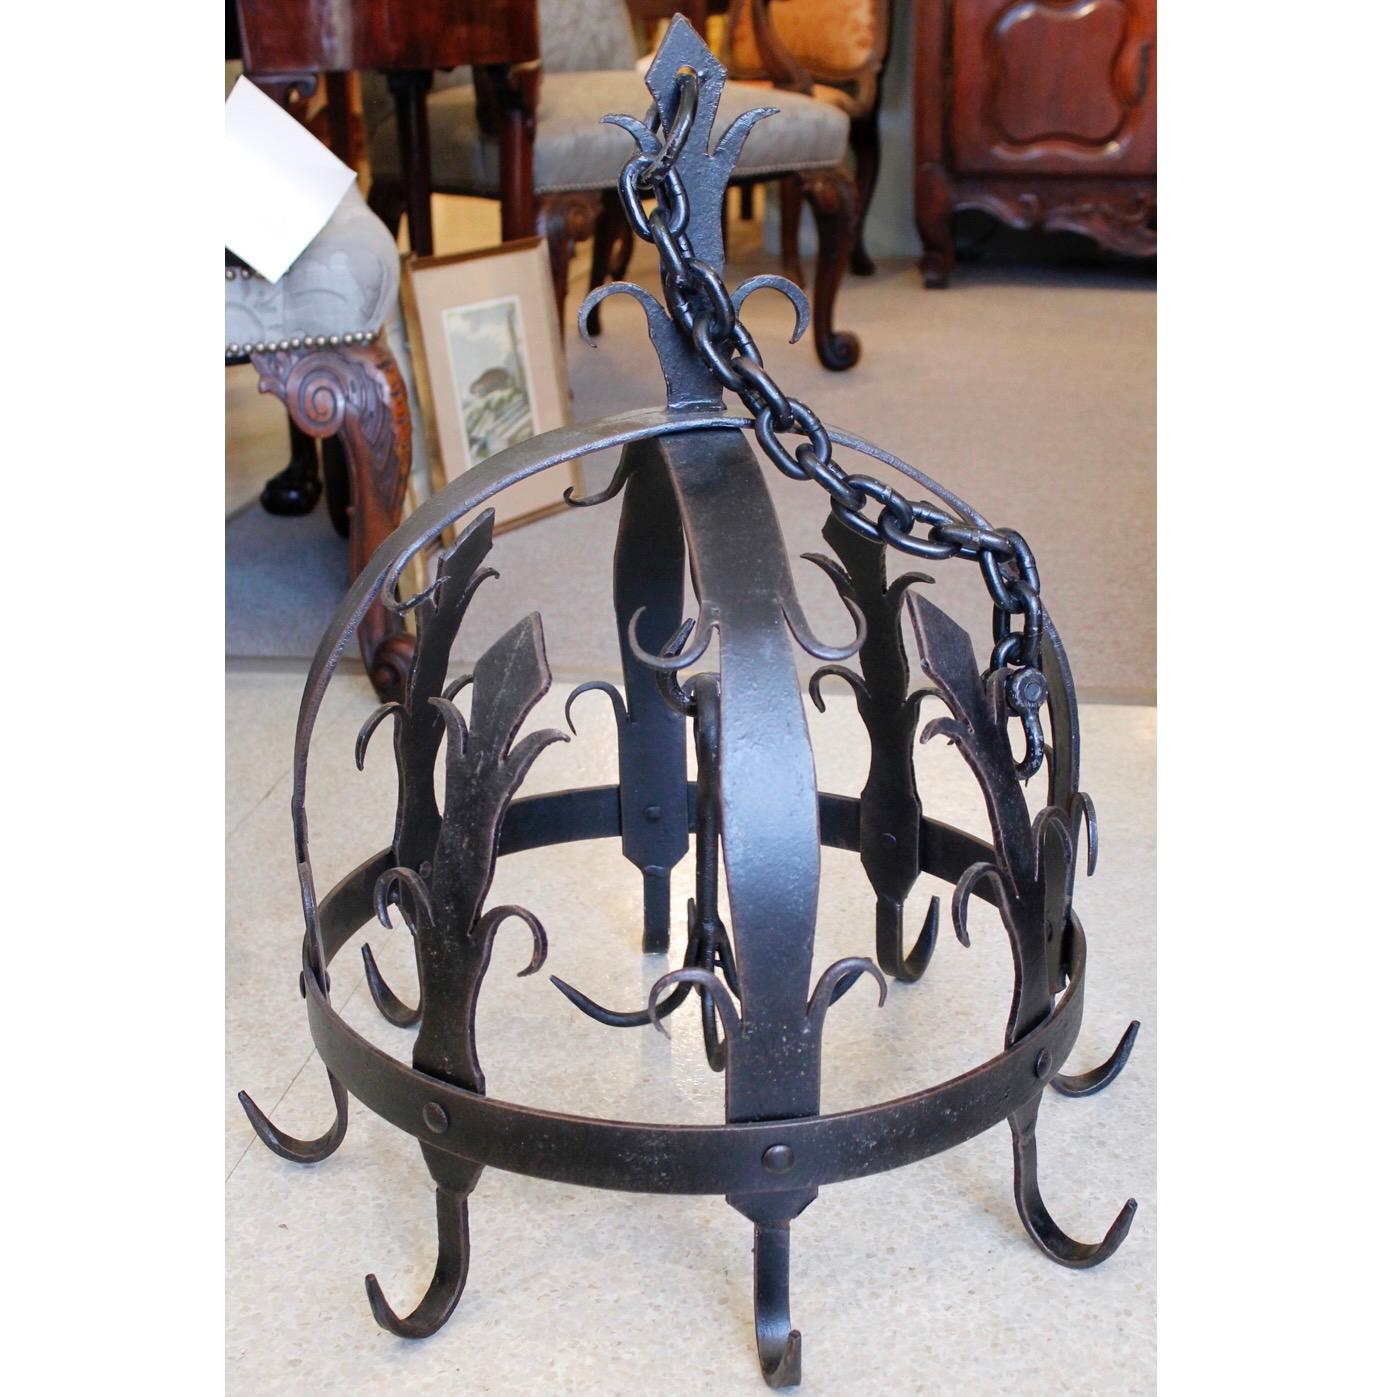 Unknown Ornamental Wrought Iron Pot Rack Or Herb Drying Rack For Sale